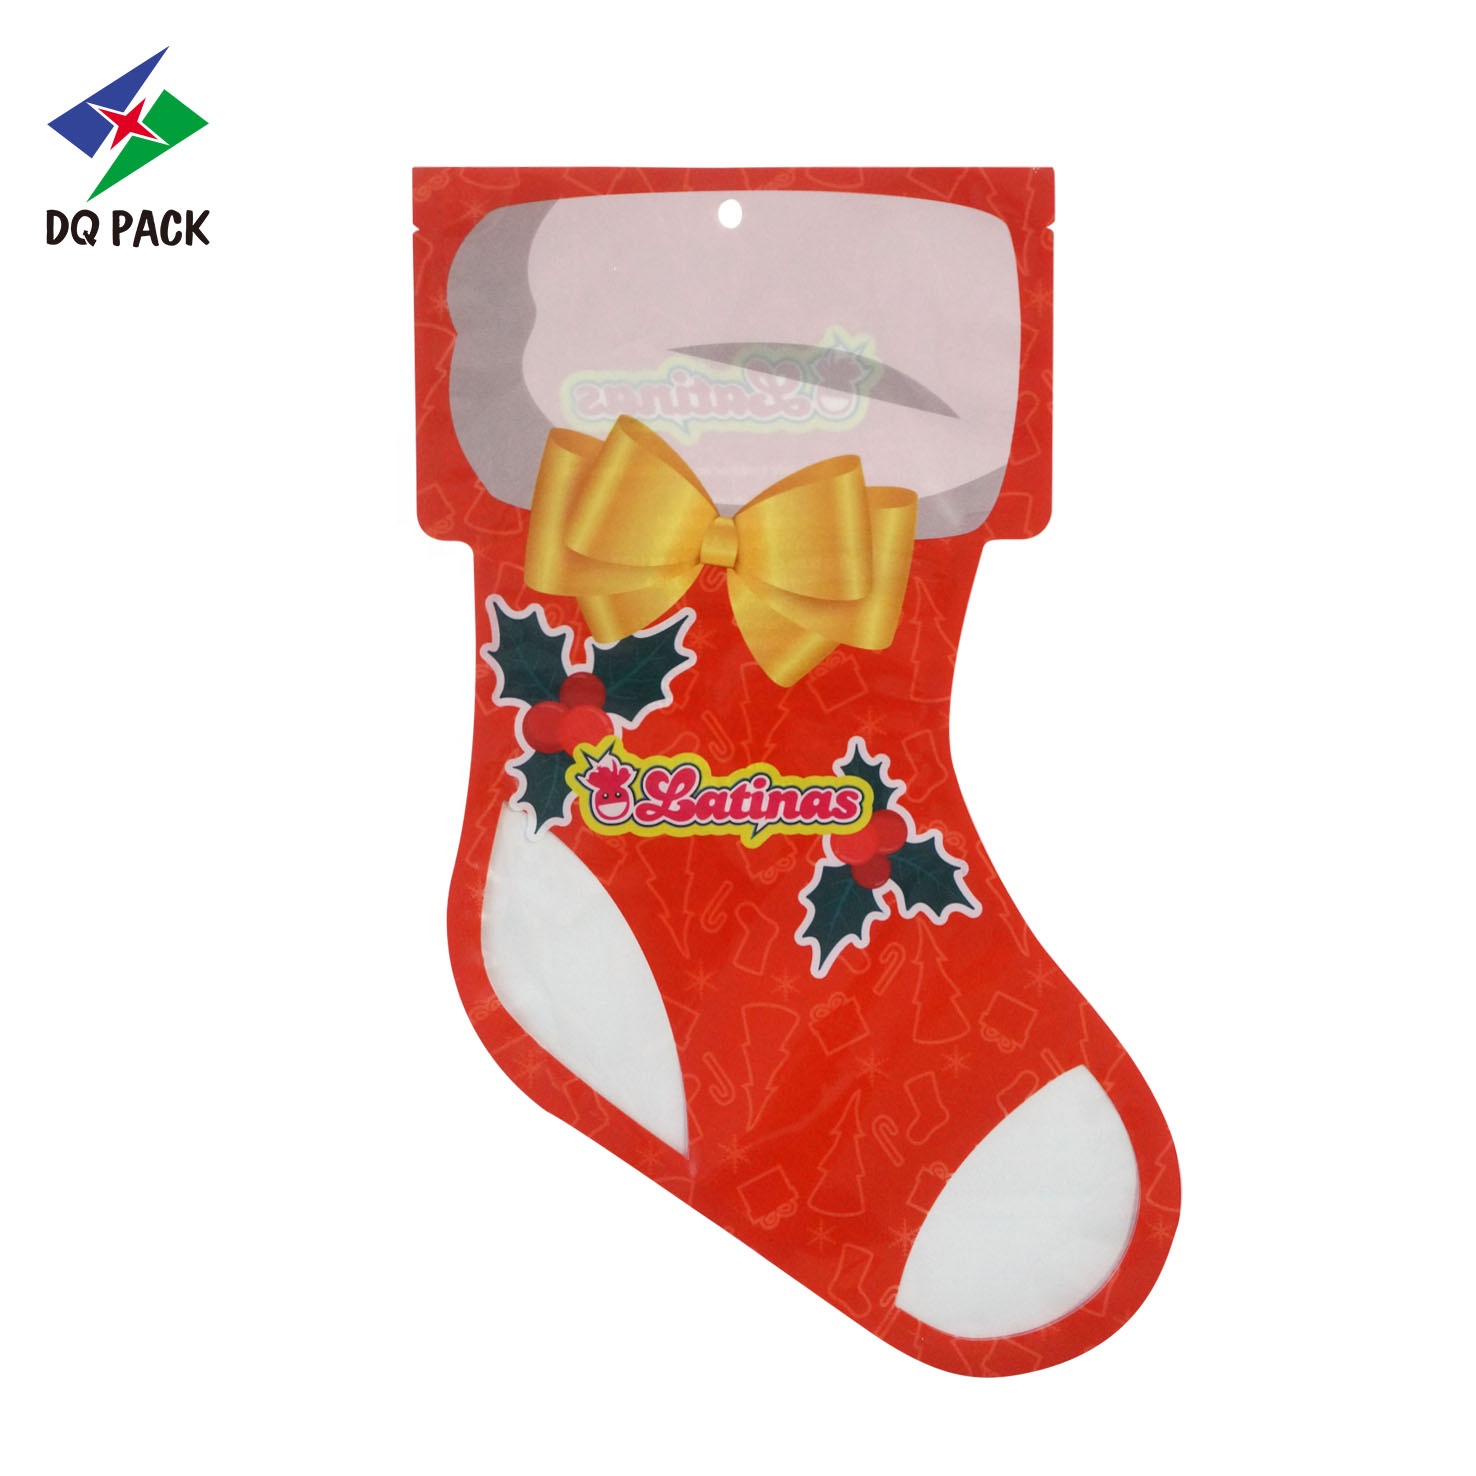 DQ PACK Heat Seal Custom Printing Special Shape Christmas Candy Packaging Bag